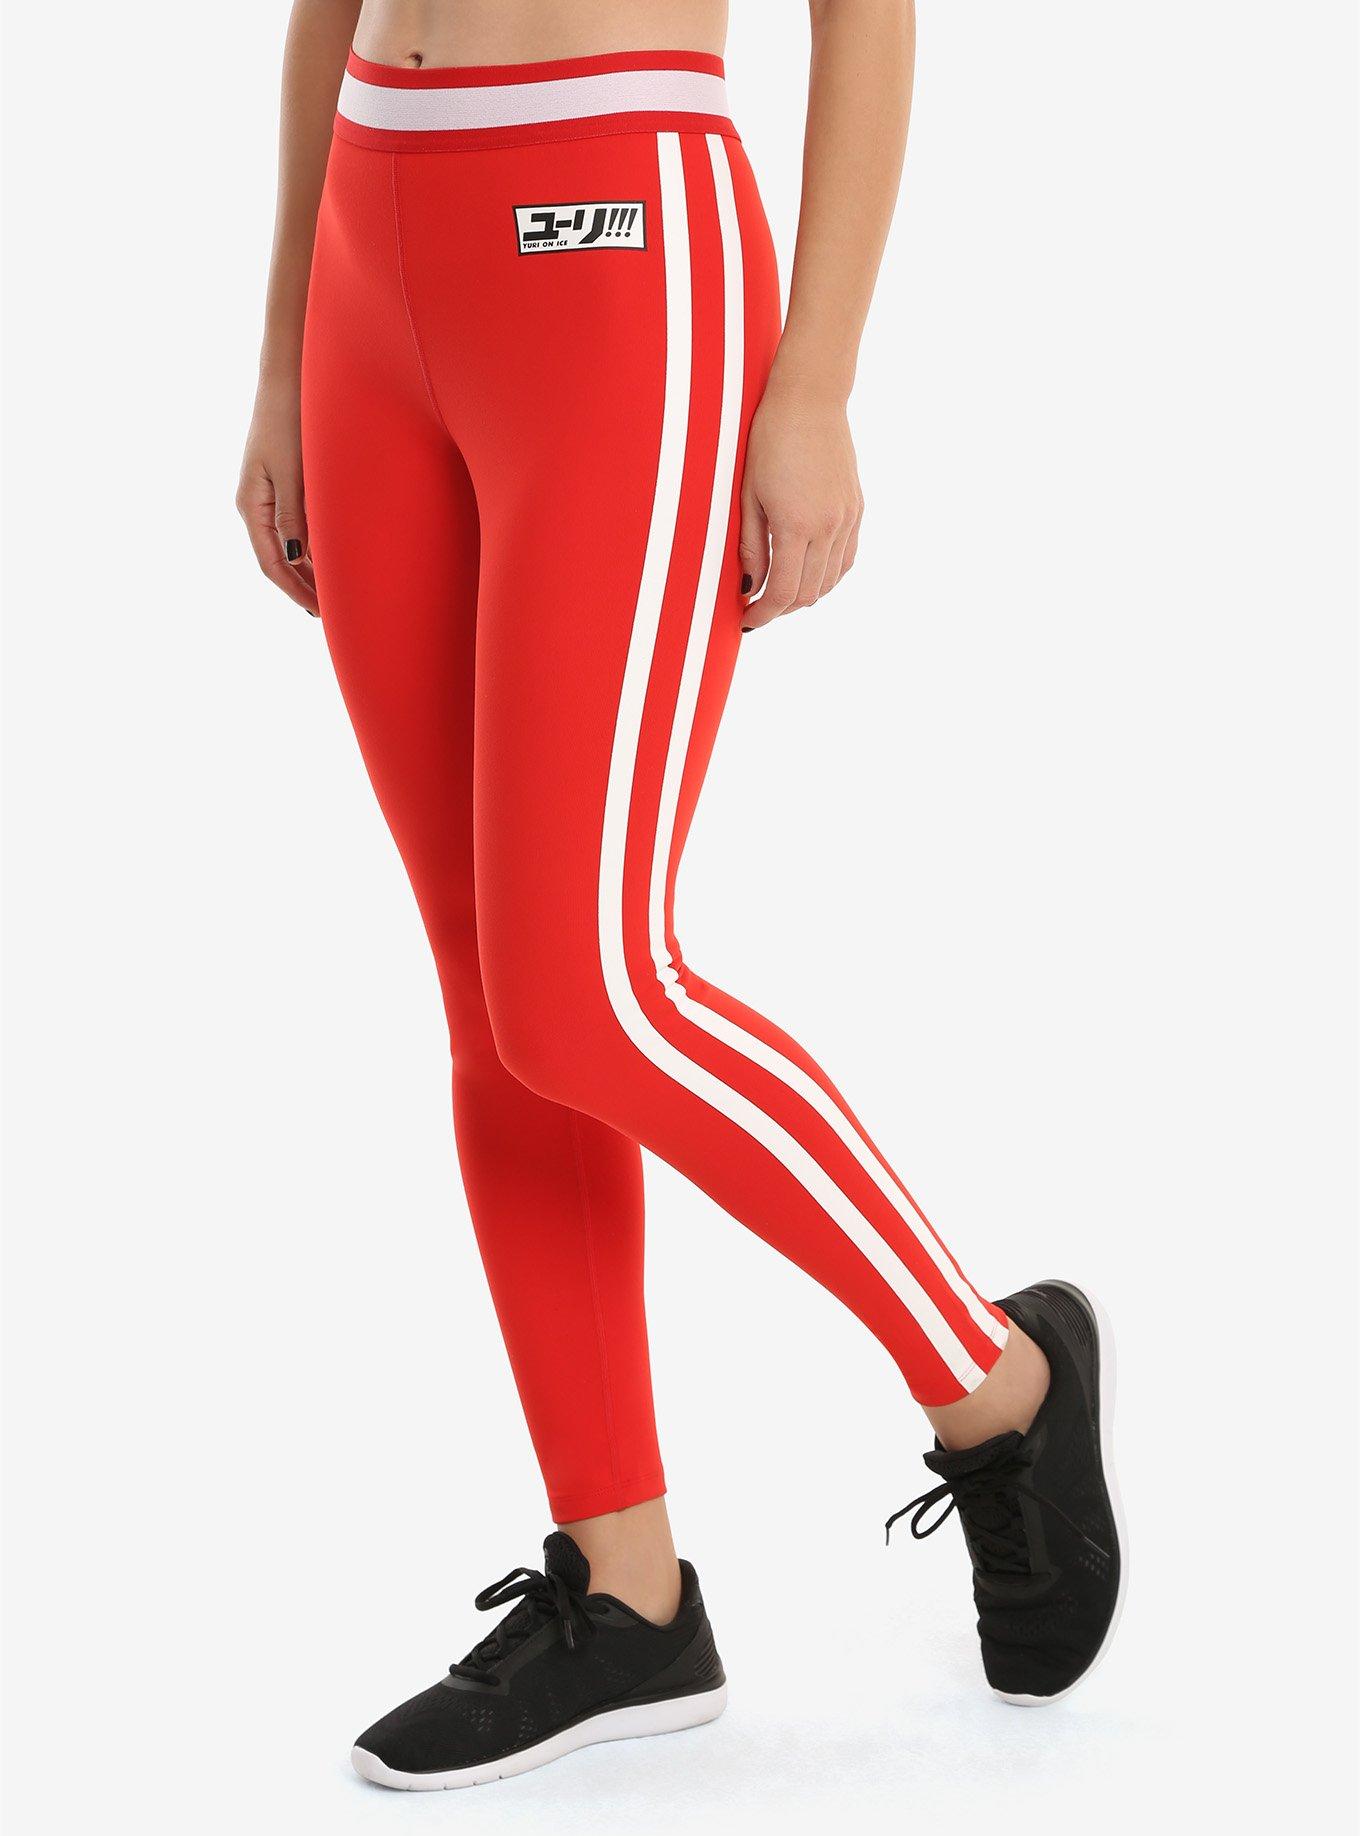 Yuri!!! On Ice Red Active Pants, RED, hi-res